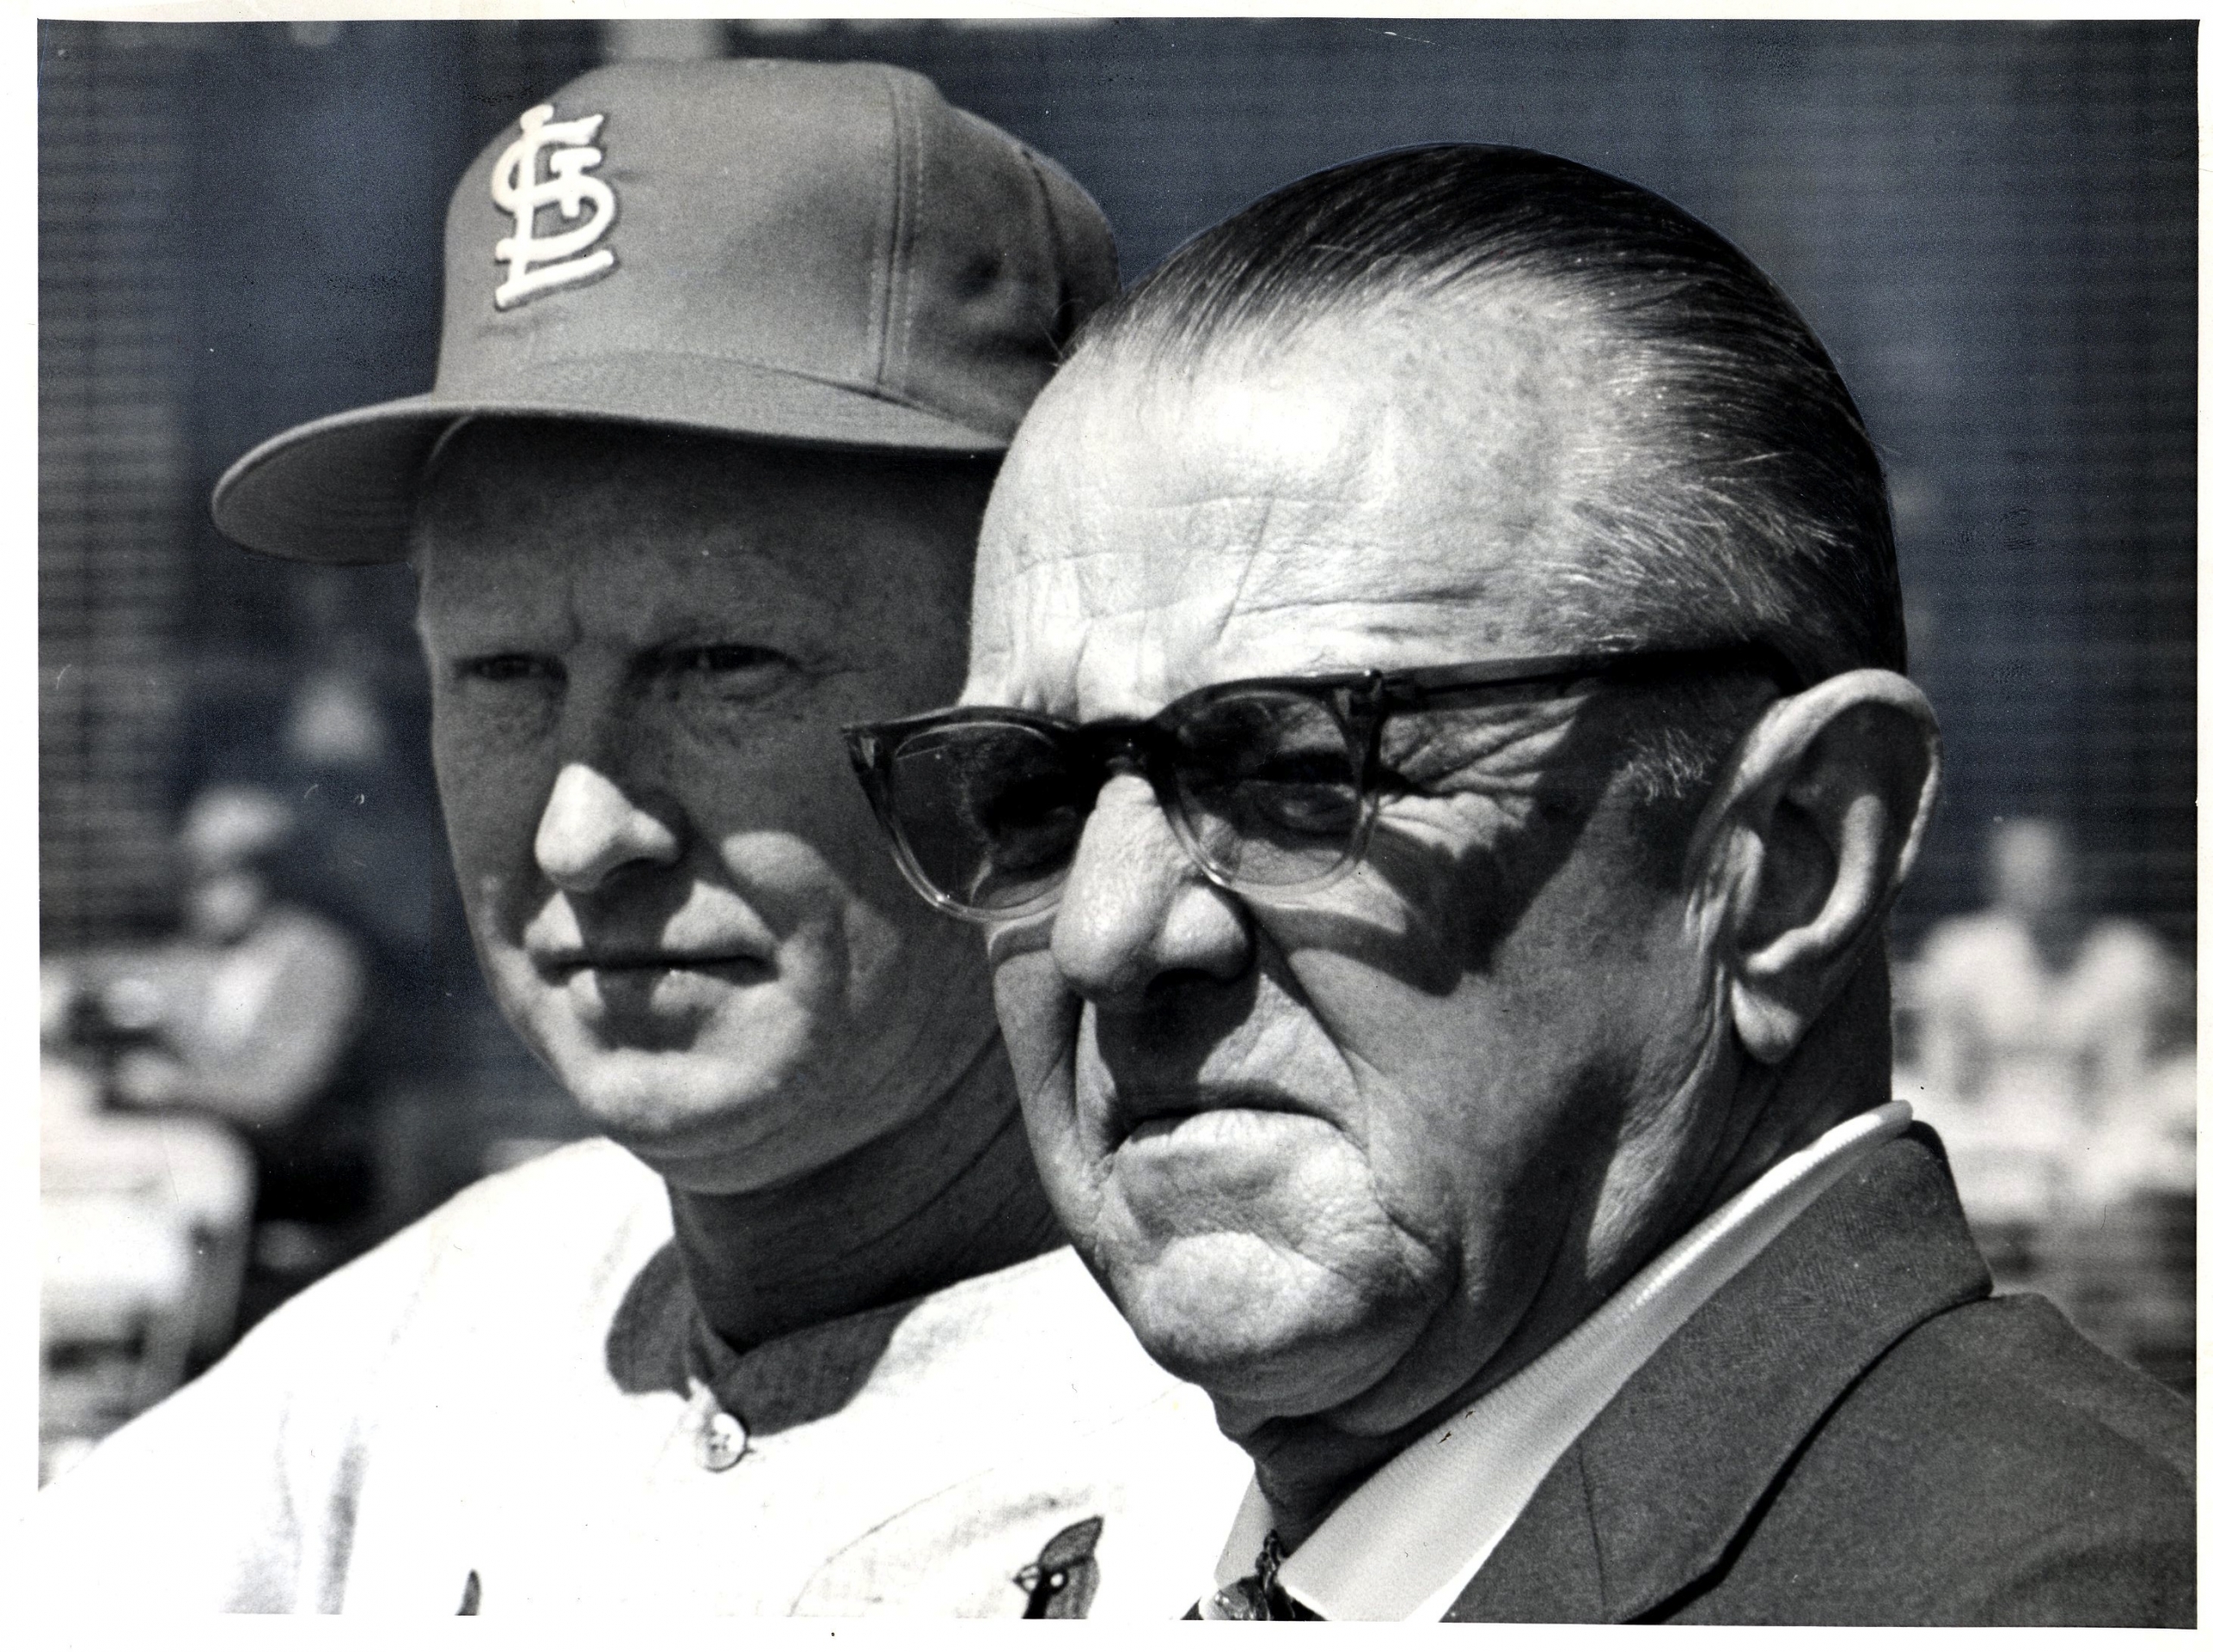 St. Louis Cardinals owner August A. “Gussie” Busch Jr., right, with manager Red Schoendienst (ST. LOUIS CARDINALS)